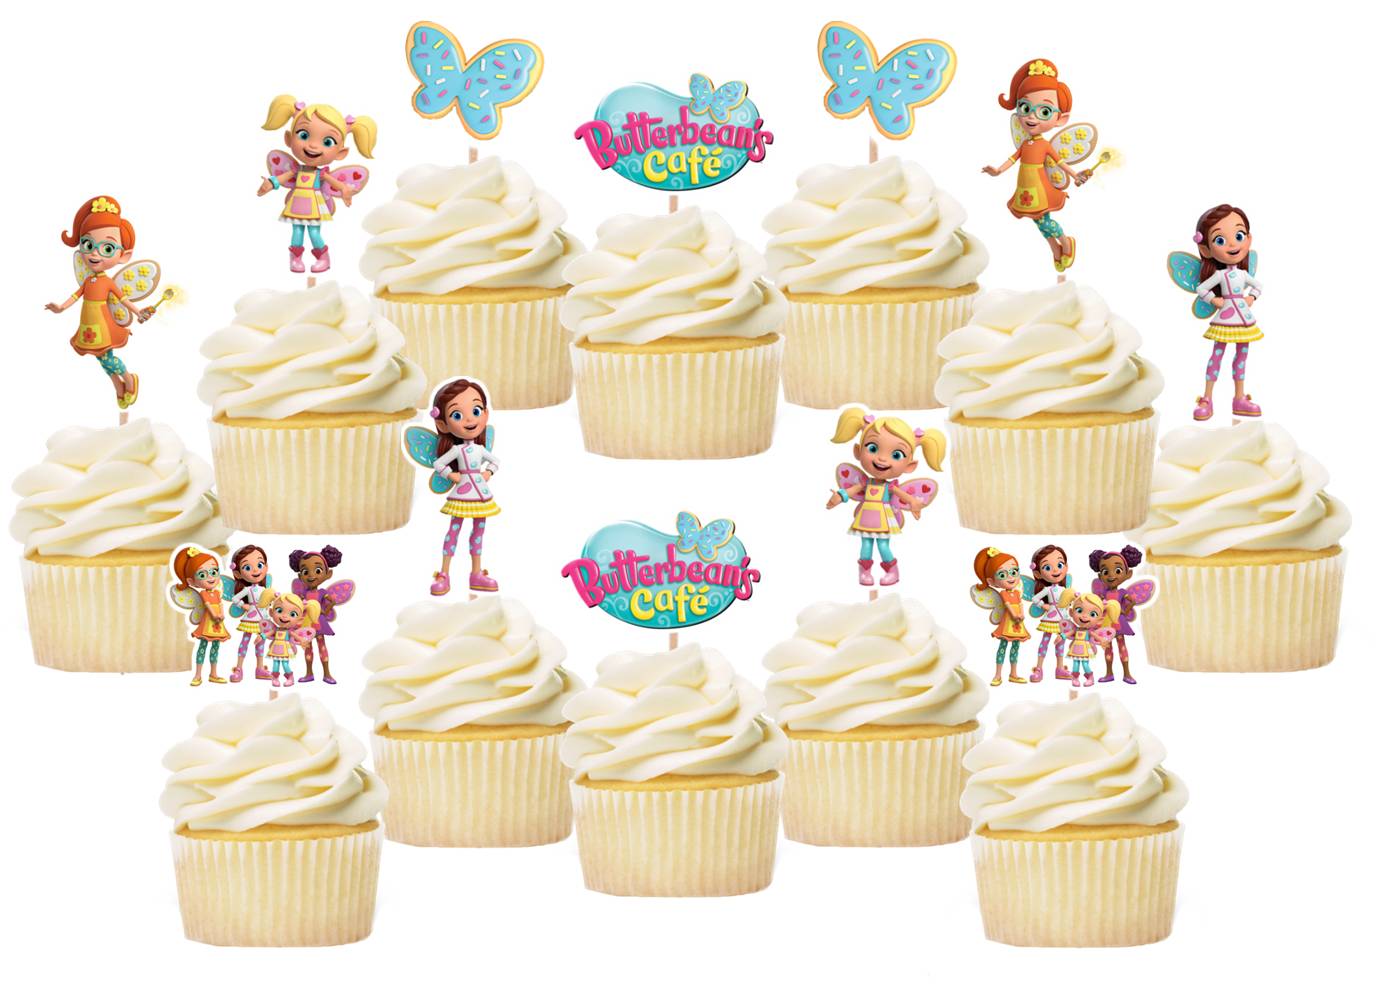 Butterbean Cafe Cupcake Toppers, Handmade